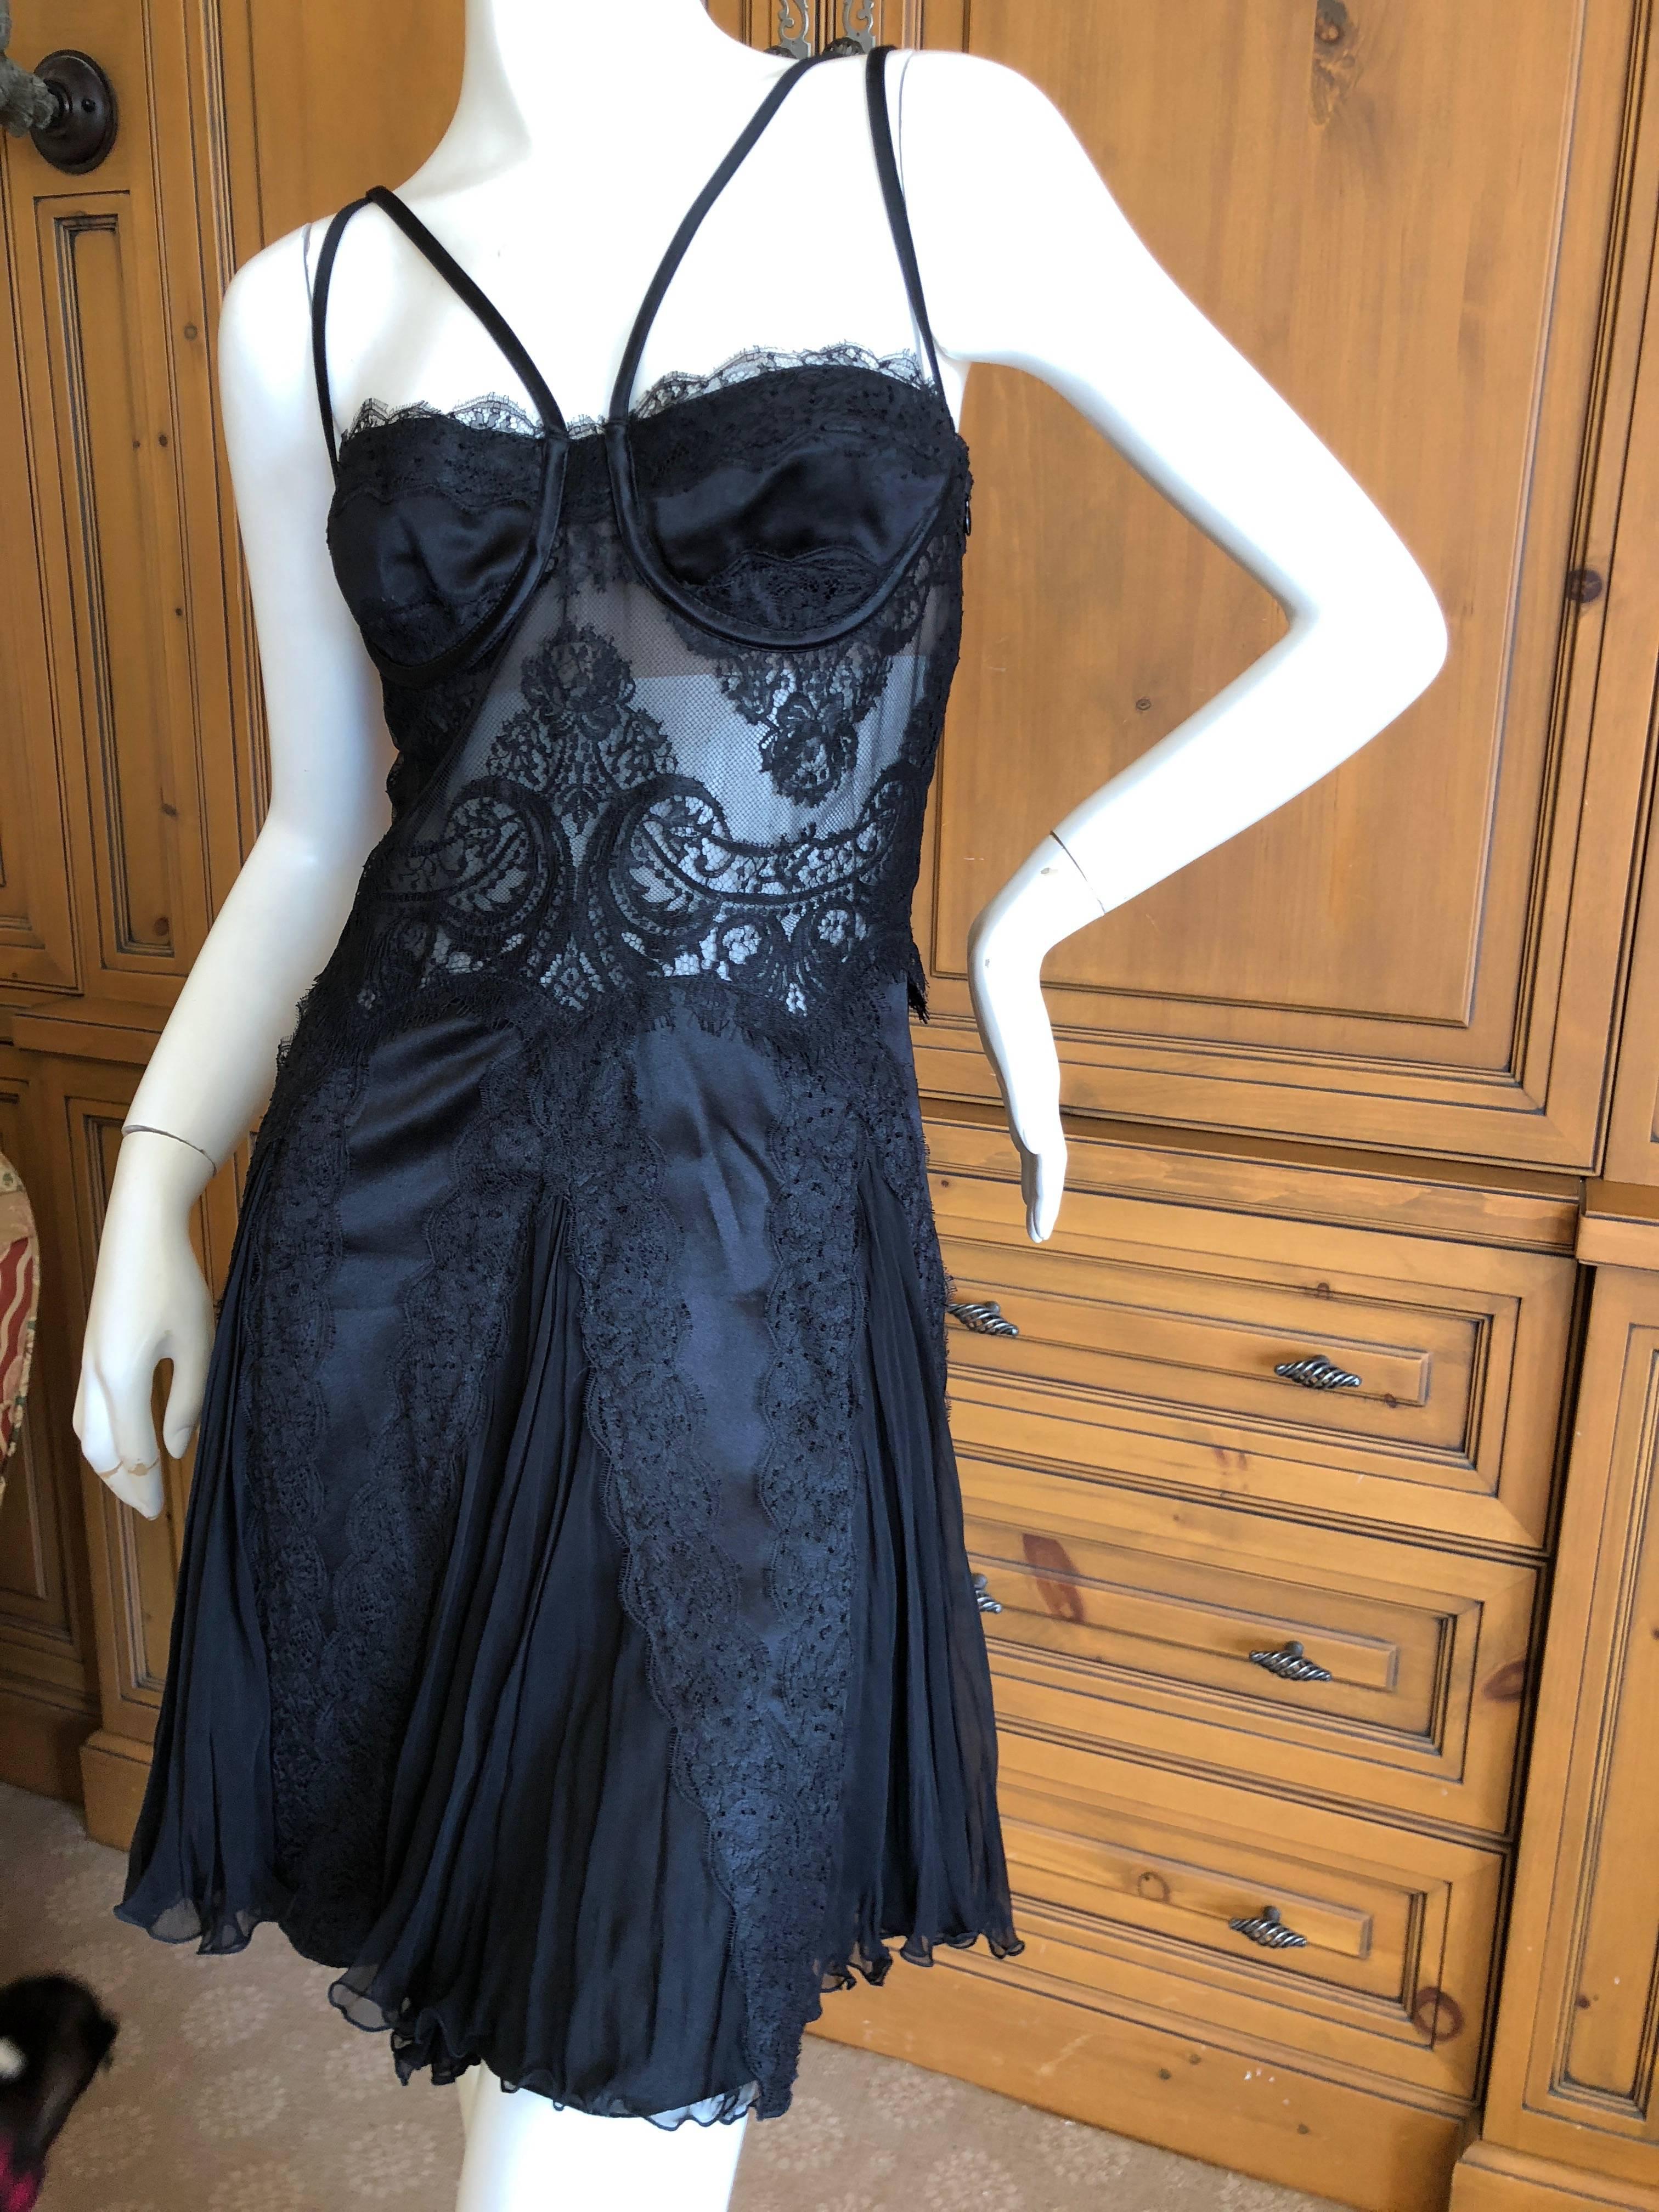 Versace Sheer Lace Accented Vintage Black Lace Mini Cocktail Dress In Excellent Condition For Sale In Cloverdale, CA